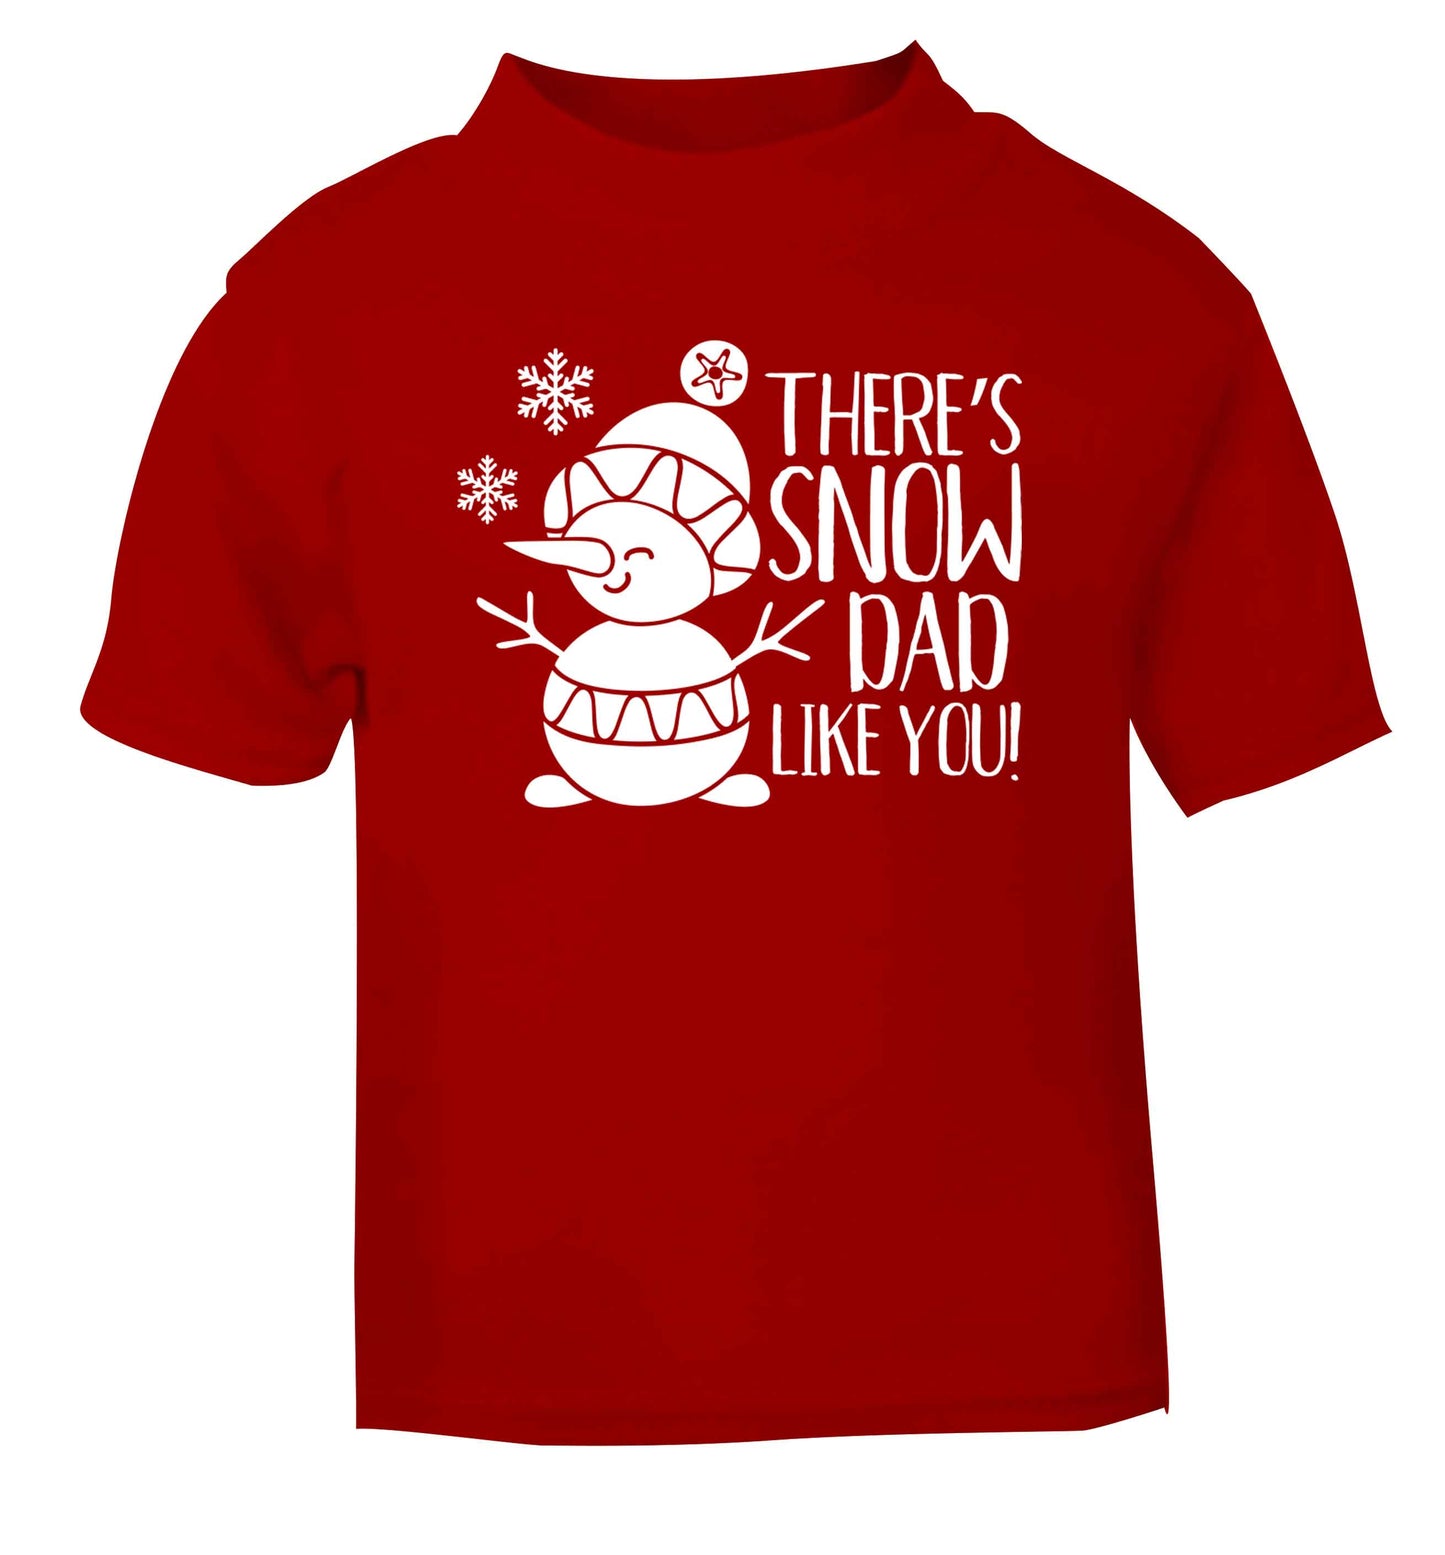 There's snow dad like you red baby toddler Tshirt 2 Years